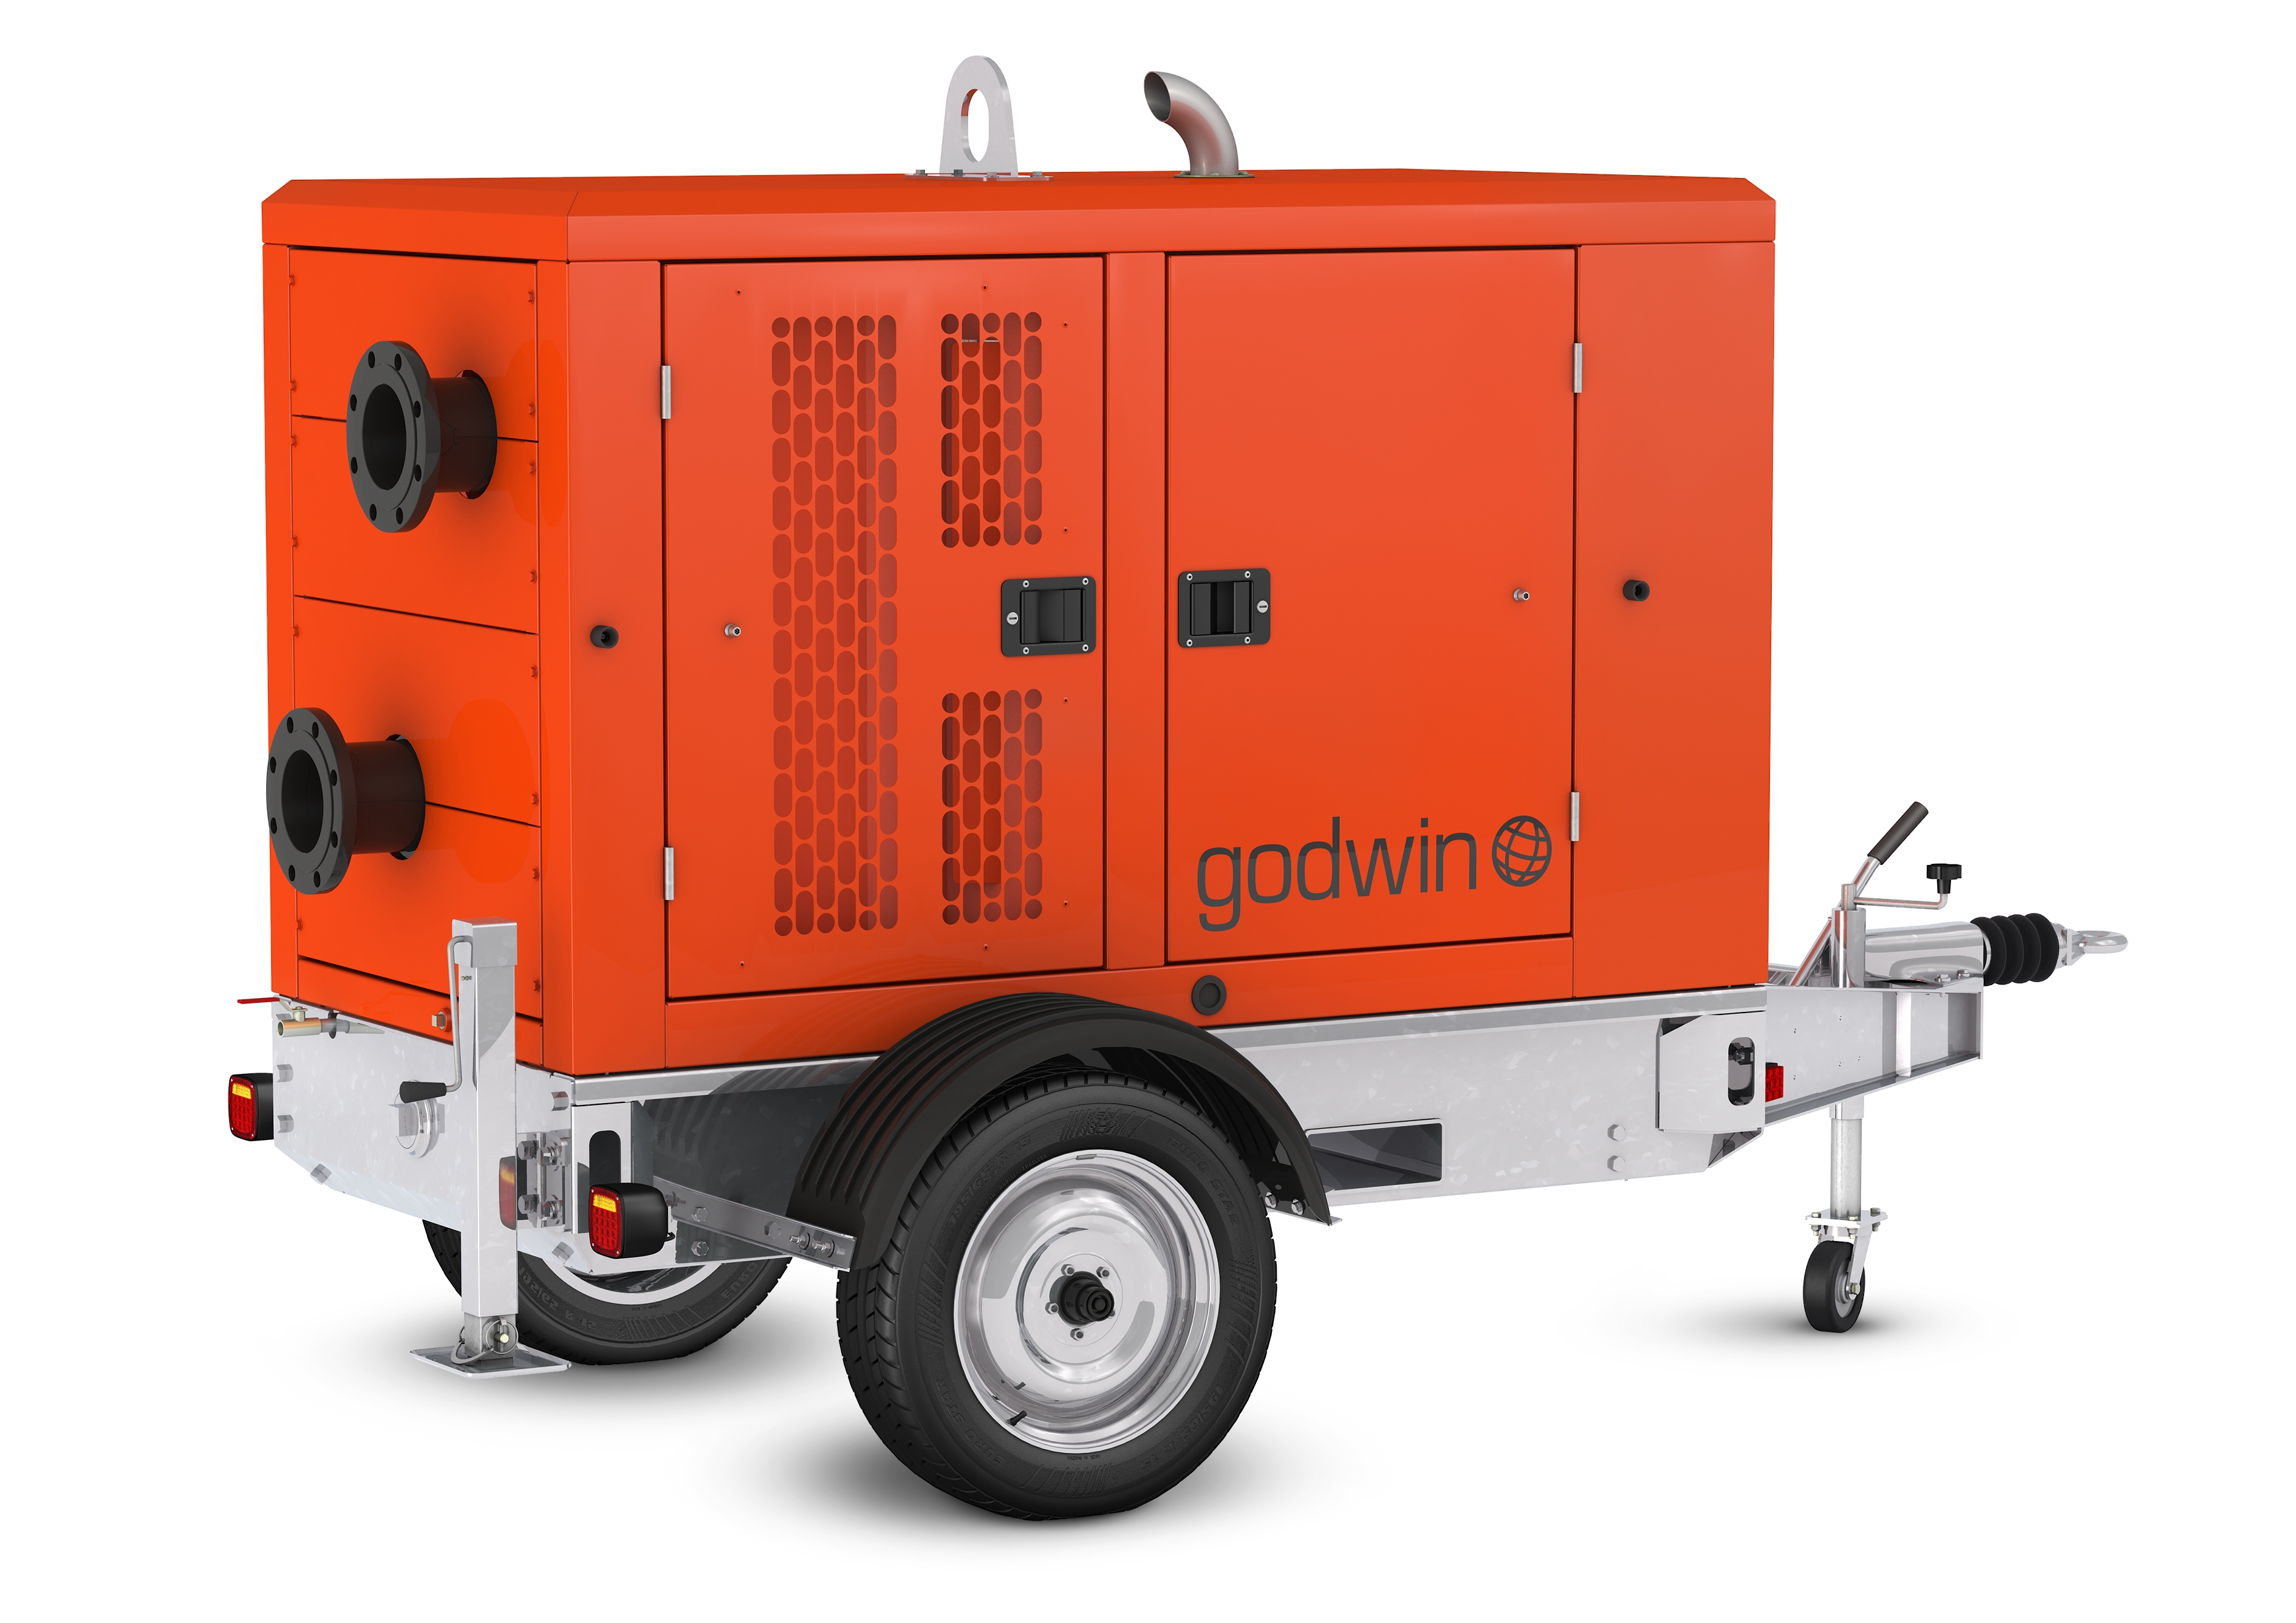 Xylem’s Godwin NC150S is a smart dewatering pump for tough applications.